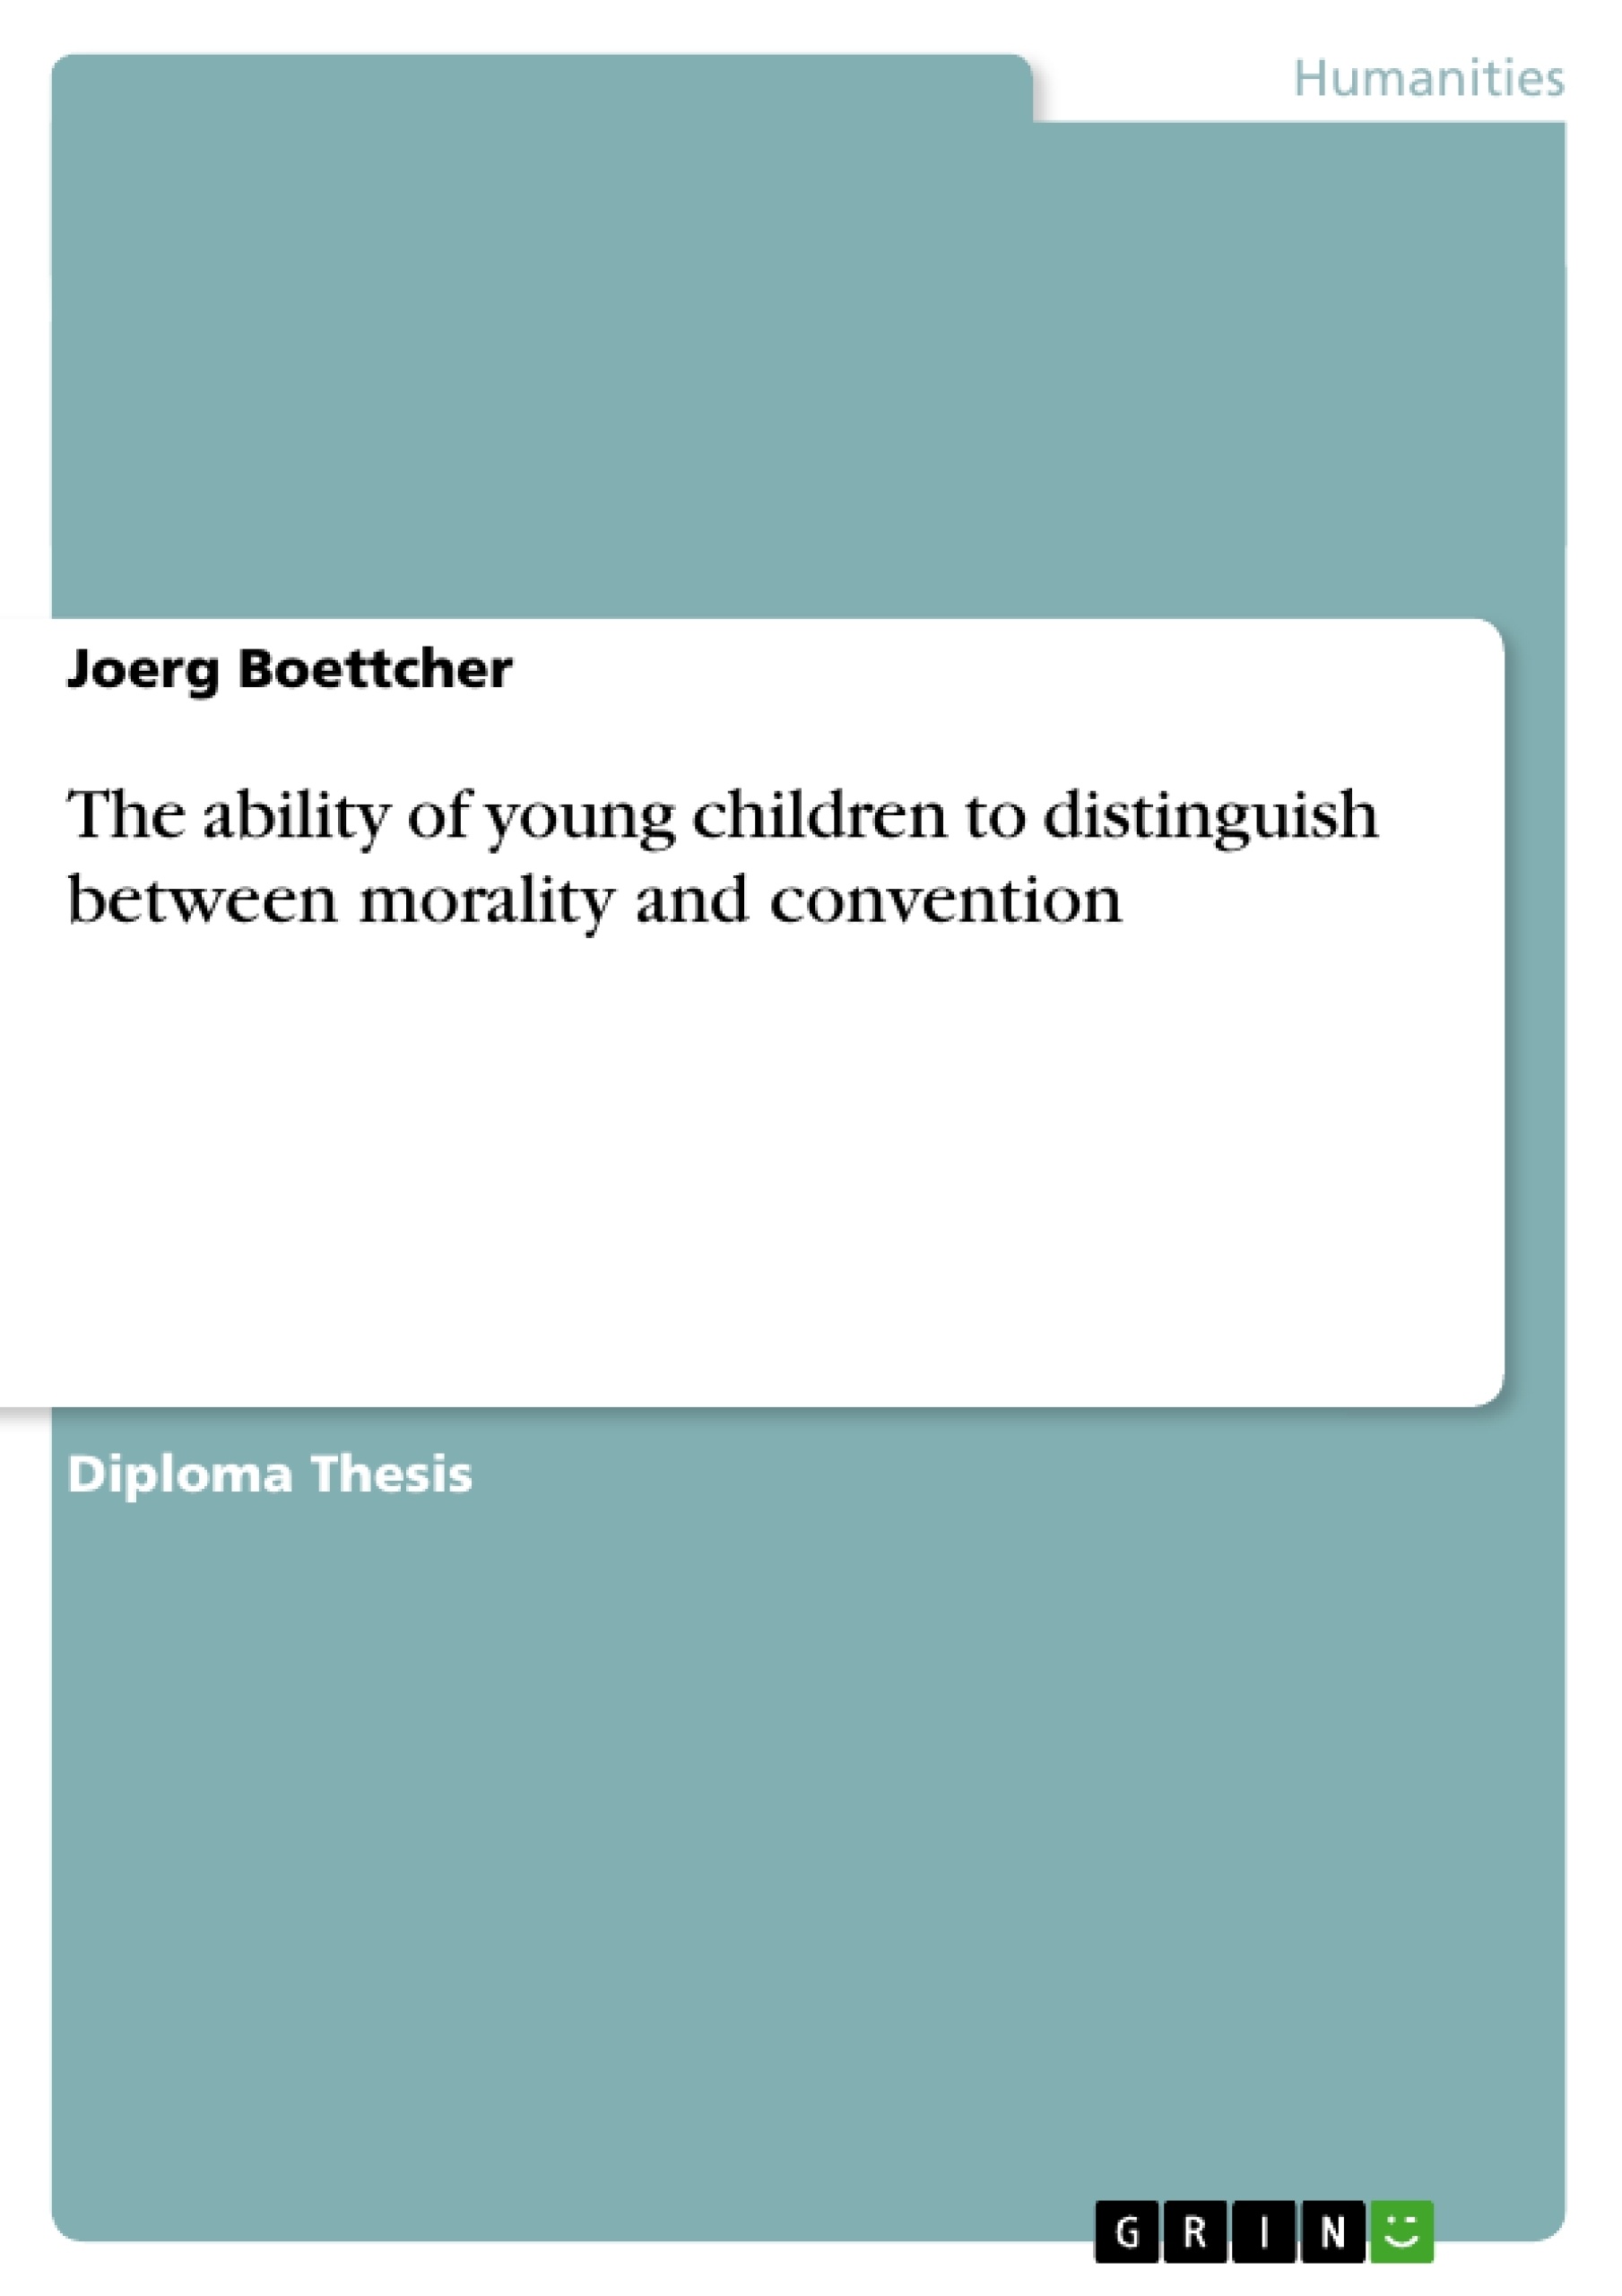 Titel: The ability of young children to distinguish between morality and convention